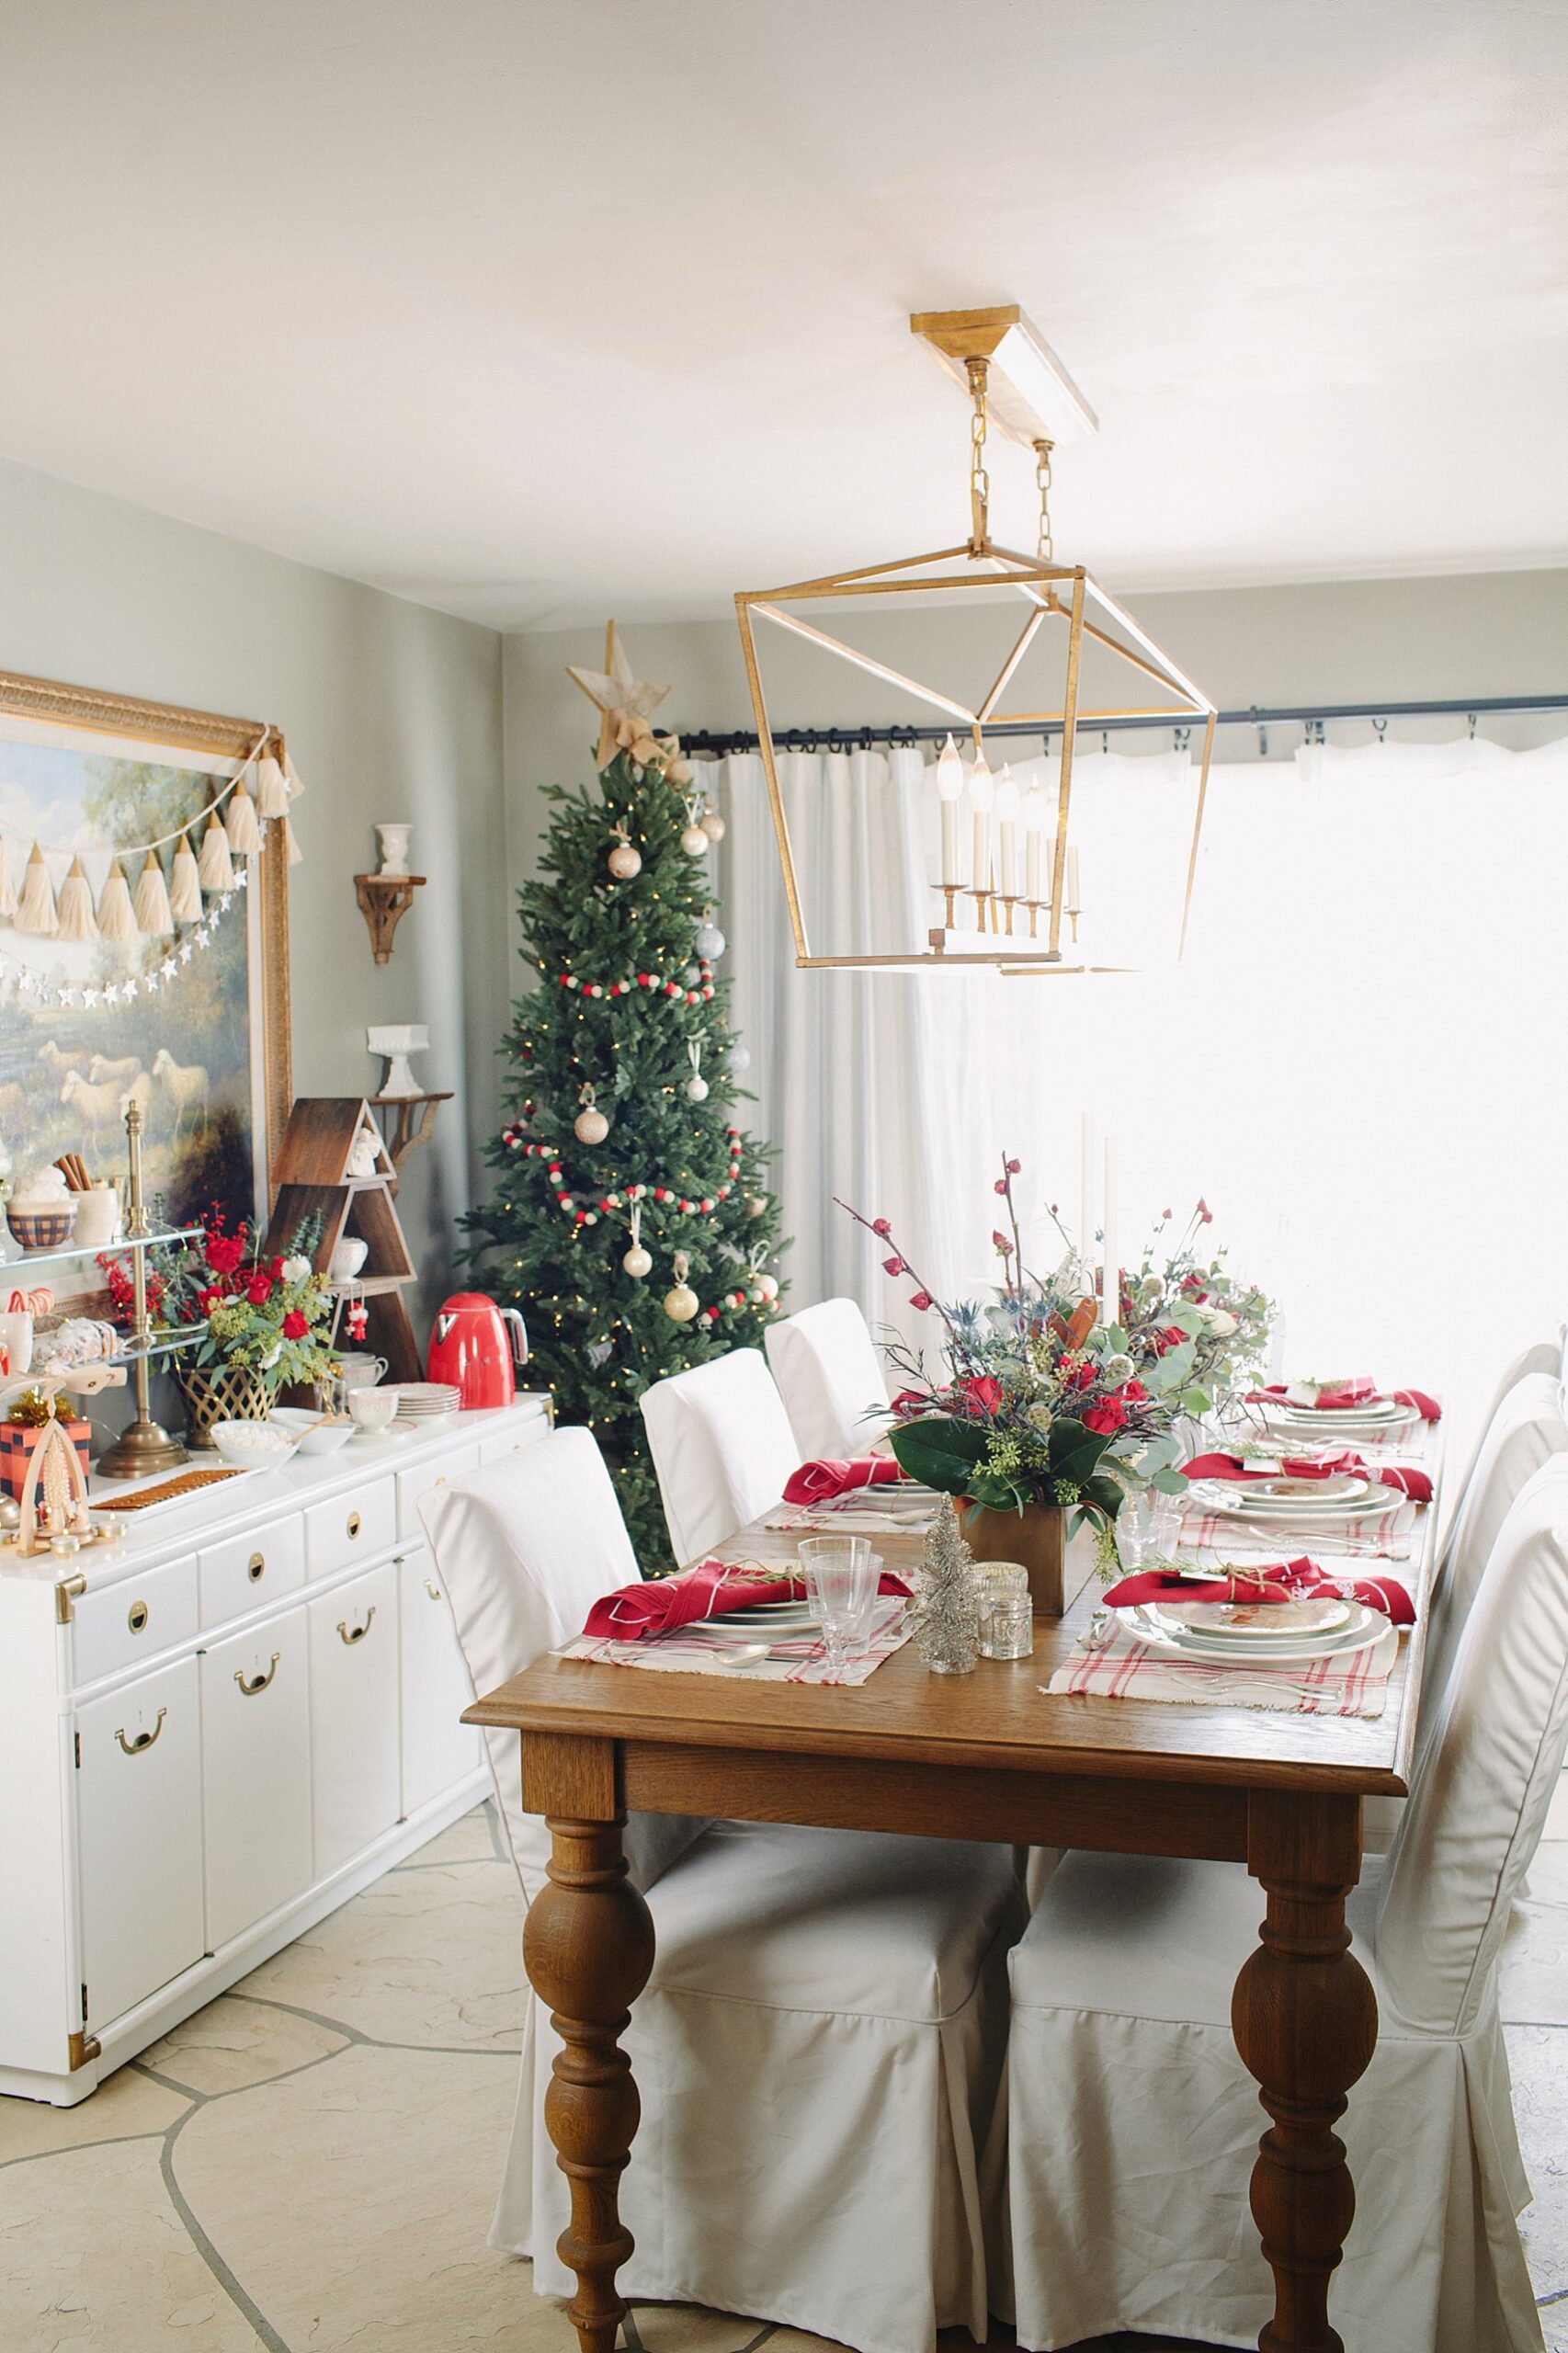 Christmas holiday tables cape inspiration red green and white Ballard Designs with blogger Diana Elizabeth